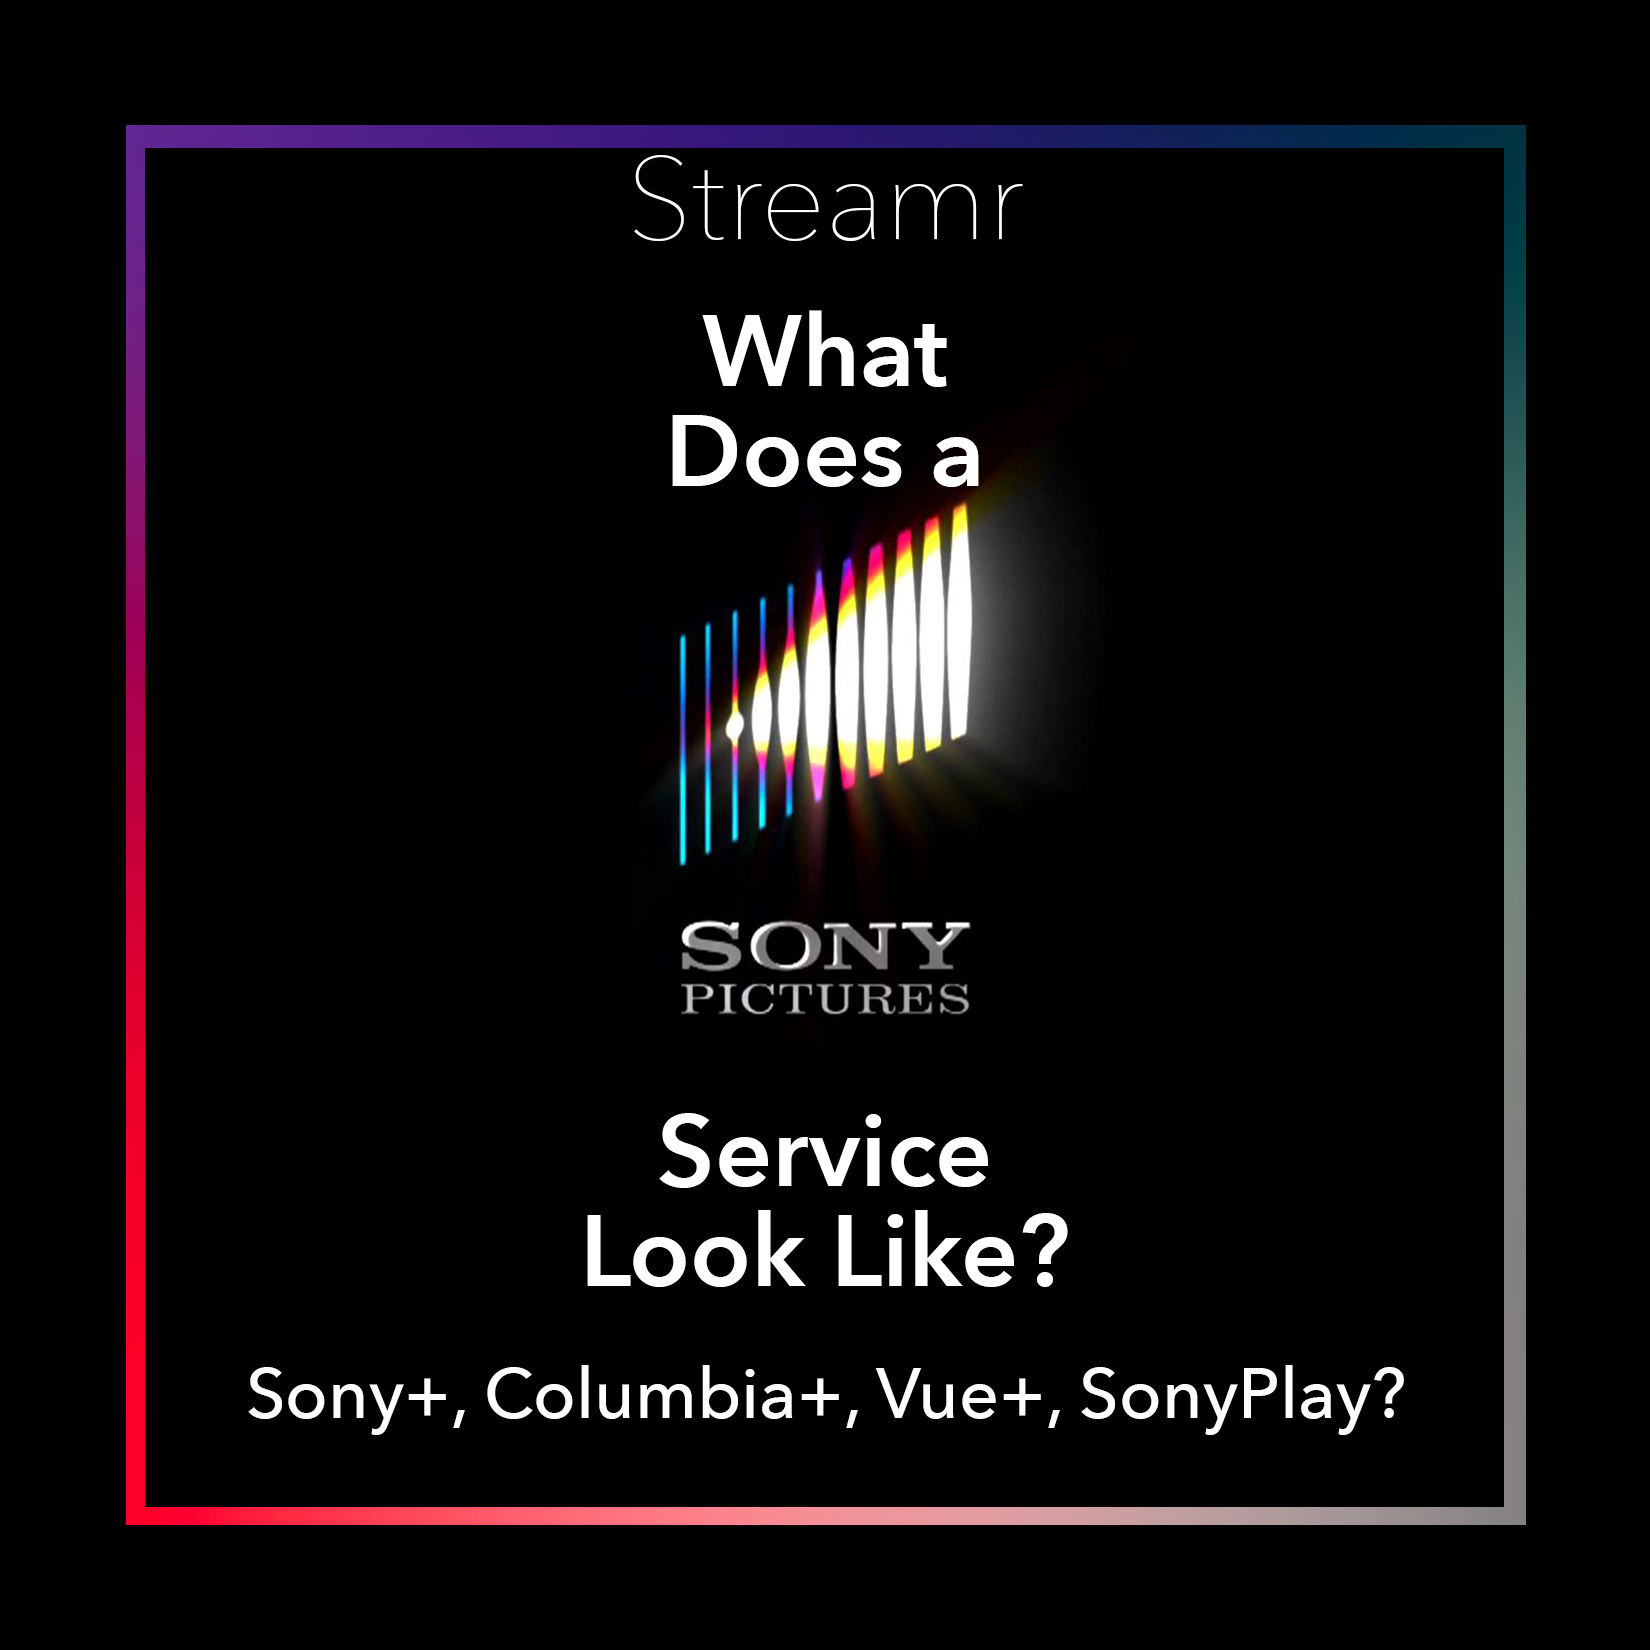 What Does a Sony Streaming Service Look Like?